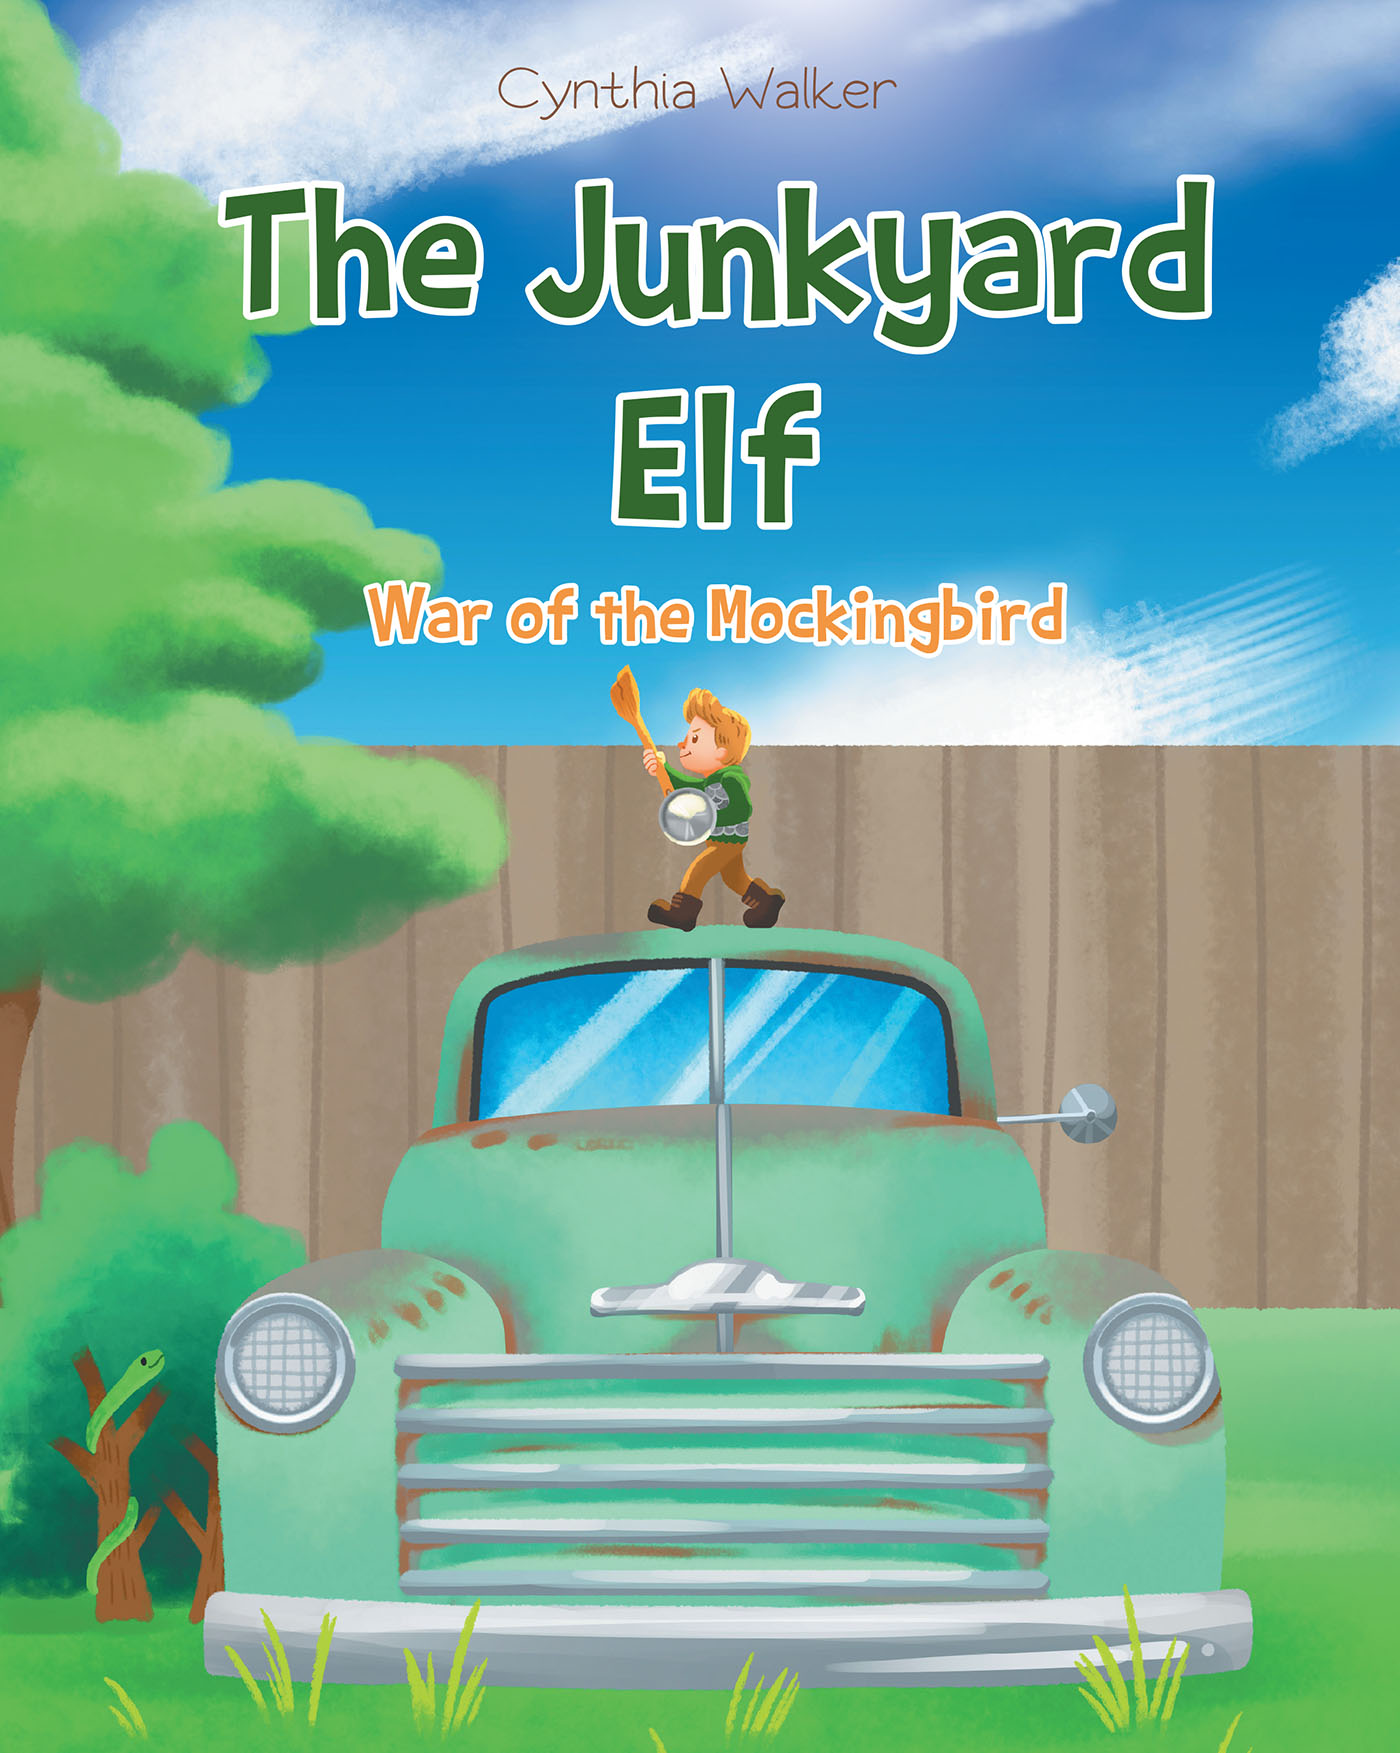 Author Cynthia Walker’s New Book "The Junkyard Elf: War of the Mockingbird" Tells the Story of a Junkyard Elf Who Seeks Out Strength from the Lord to Protect His Friends